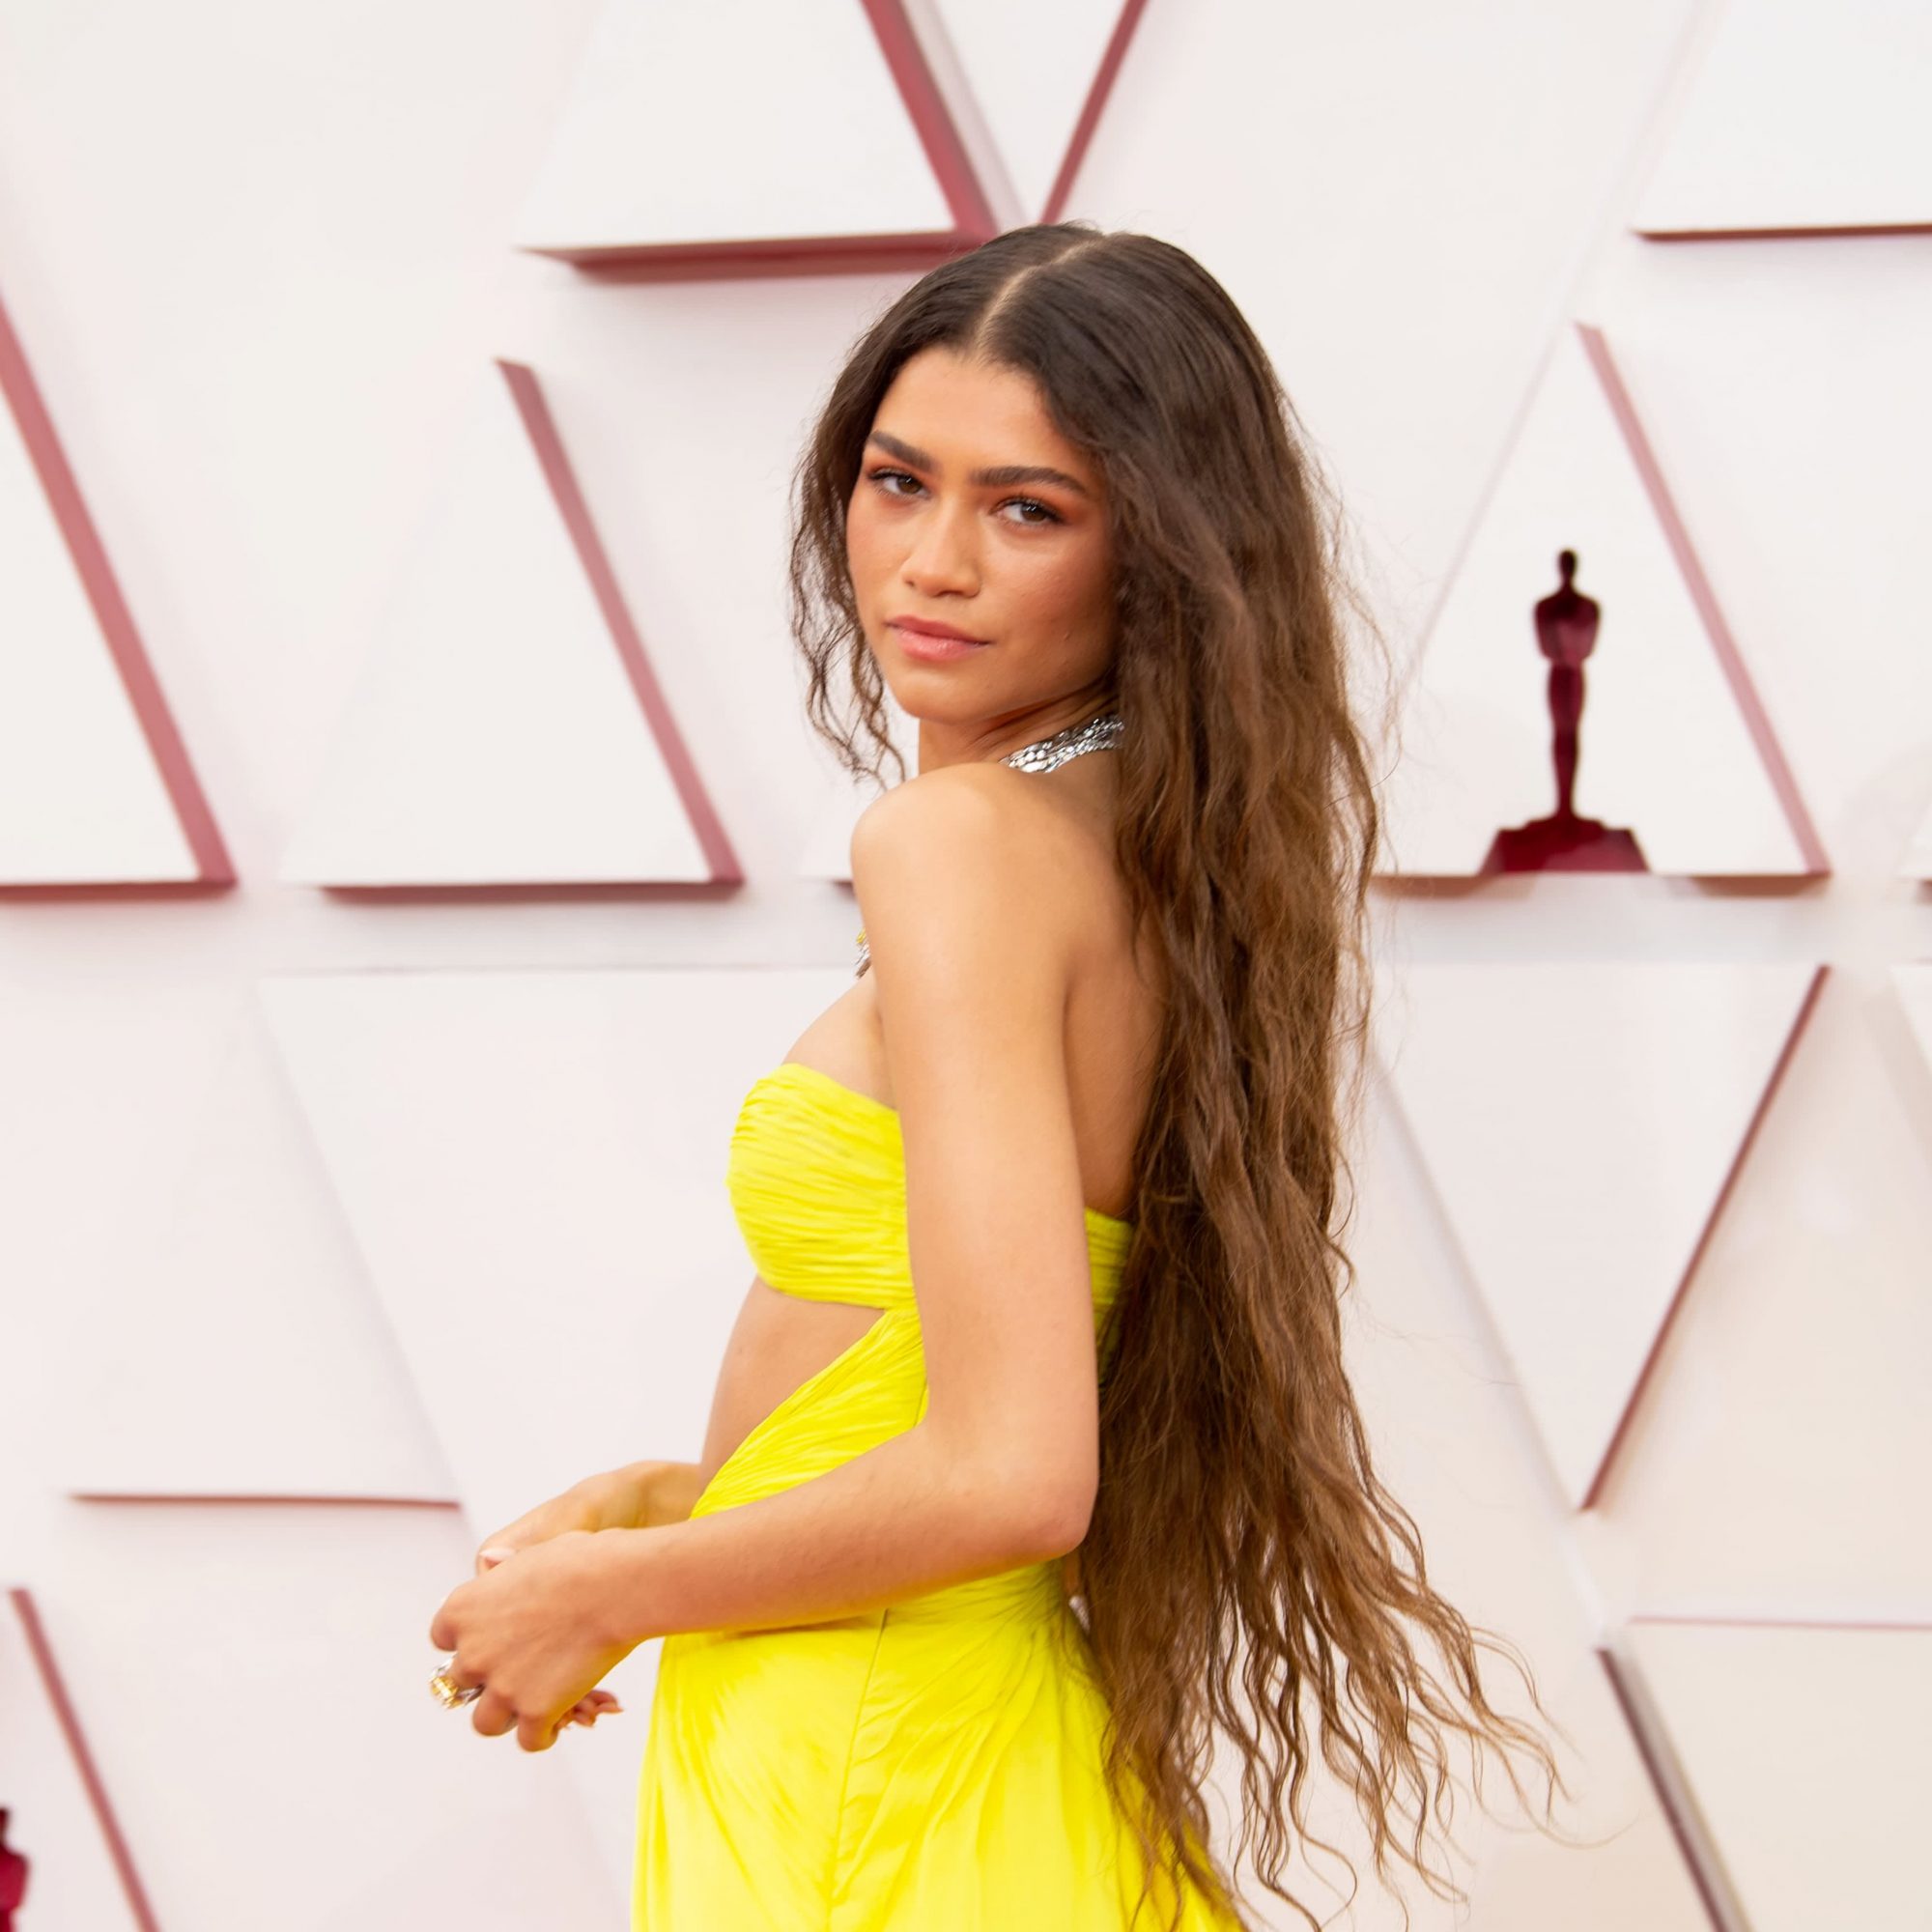 Zendaya wears vintage YSL look once owned by Eunice Johnson